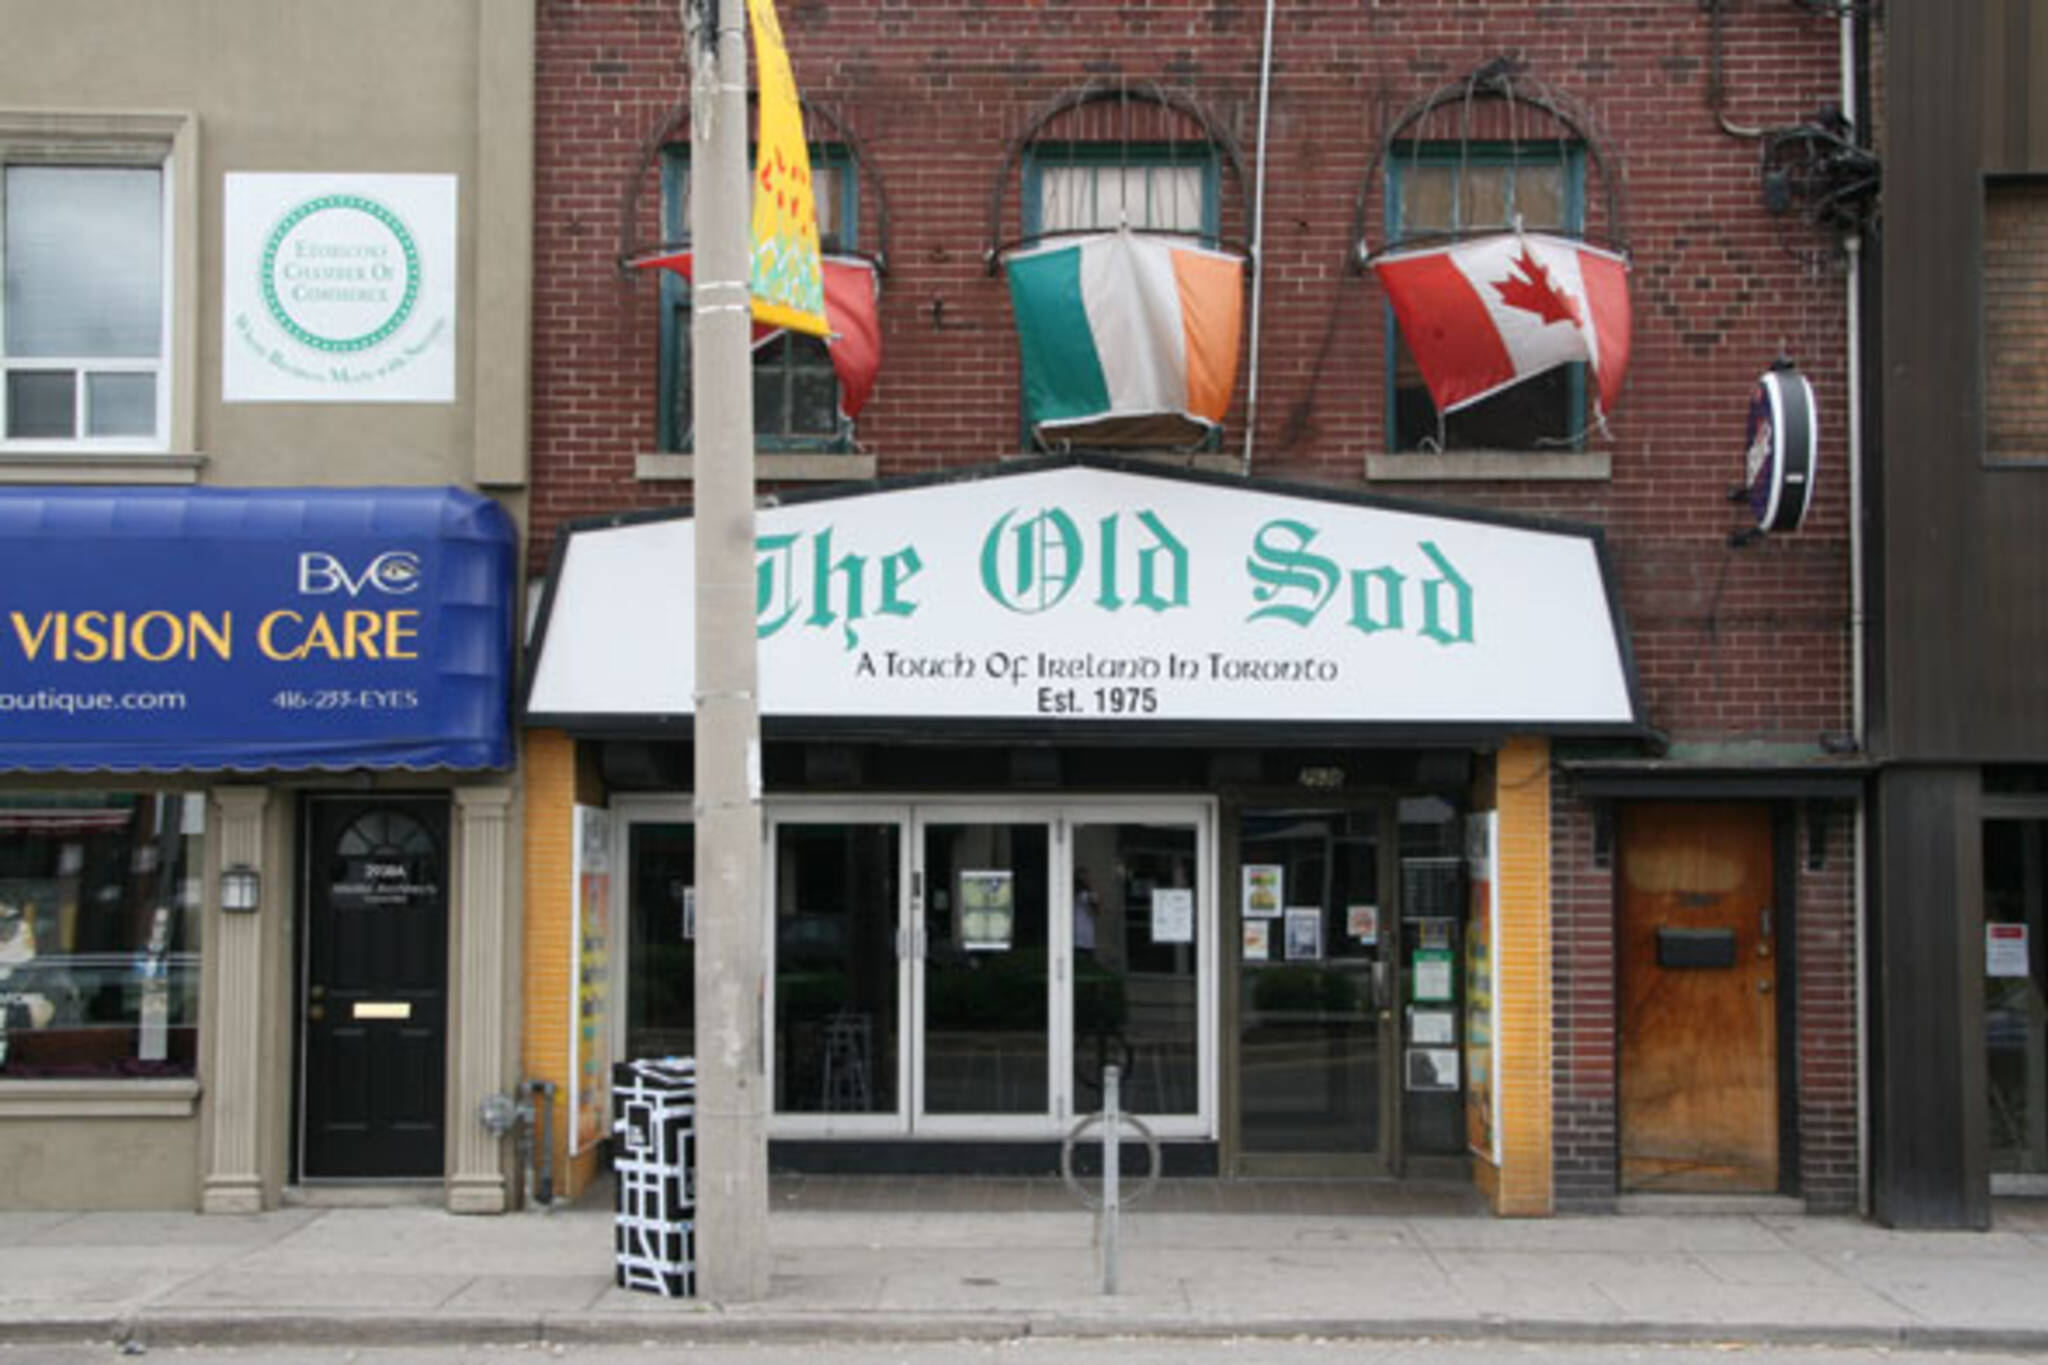 The Old Sod Toronto